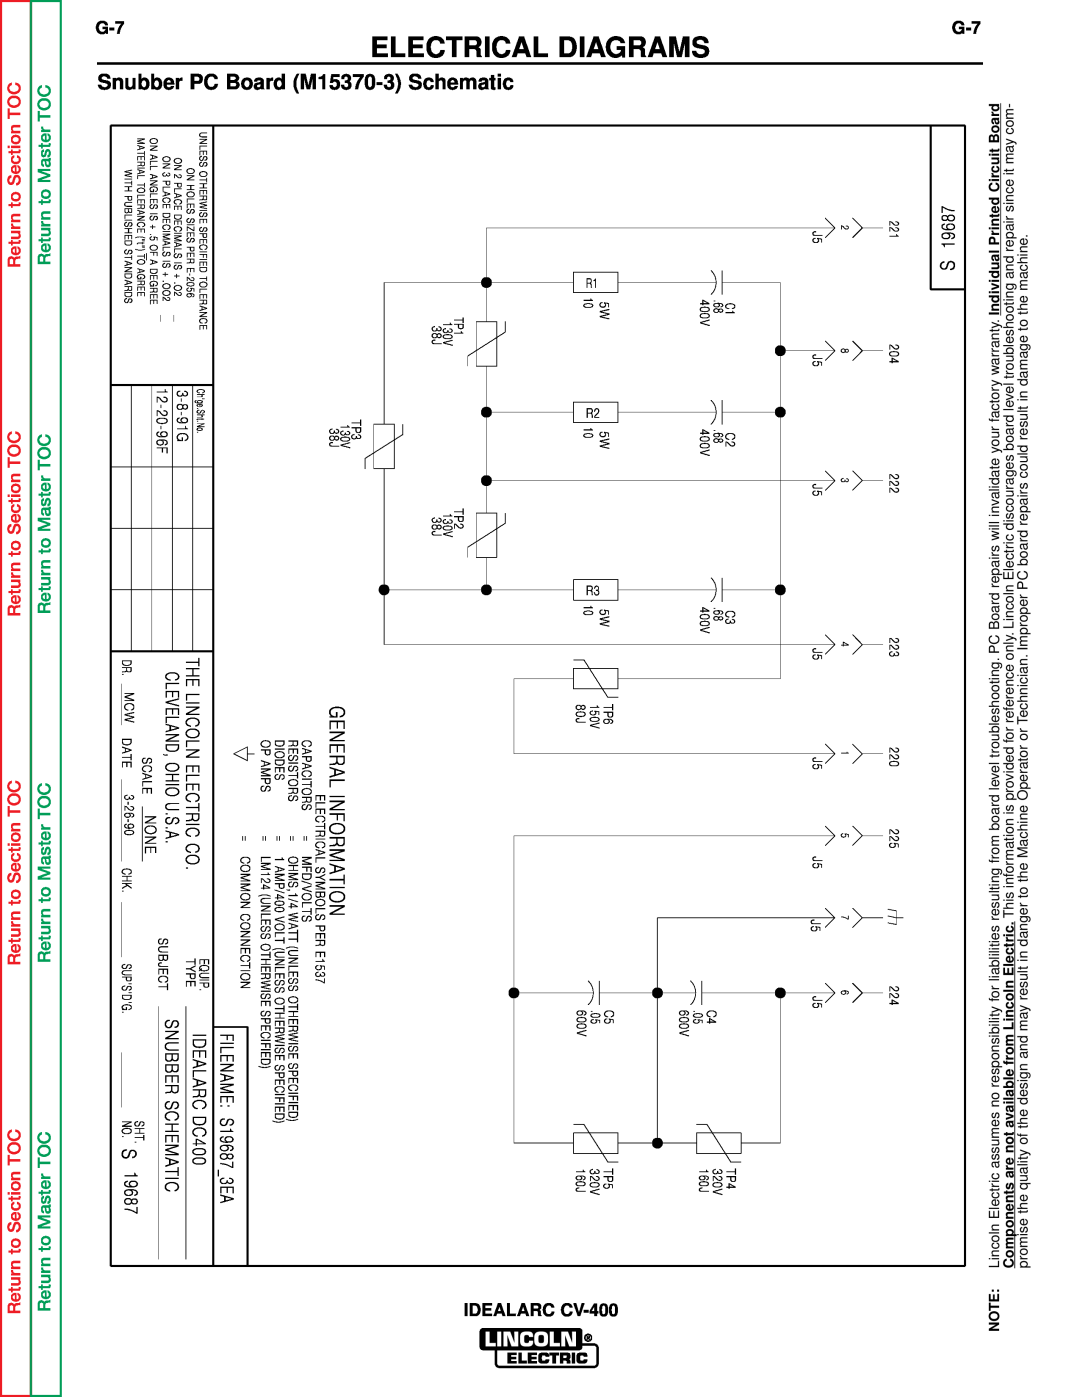 Lincoln Electric SVM136-A service manual Snubber PC Board M15370-3 Schematic, Electrical Diagrams, 38J GENERAL INFORMATION 